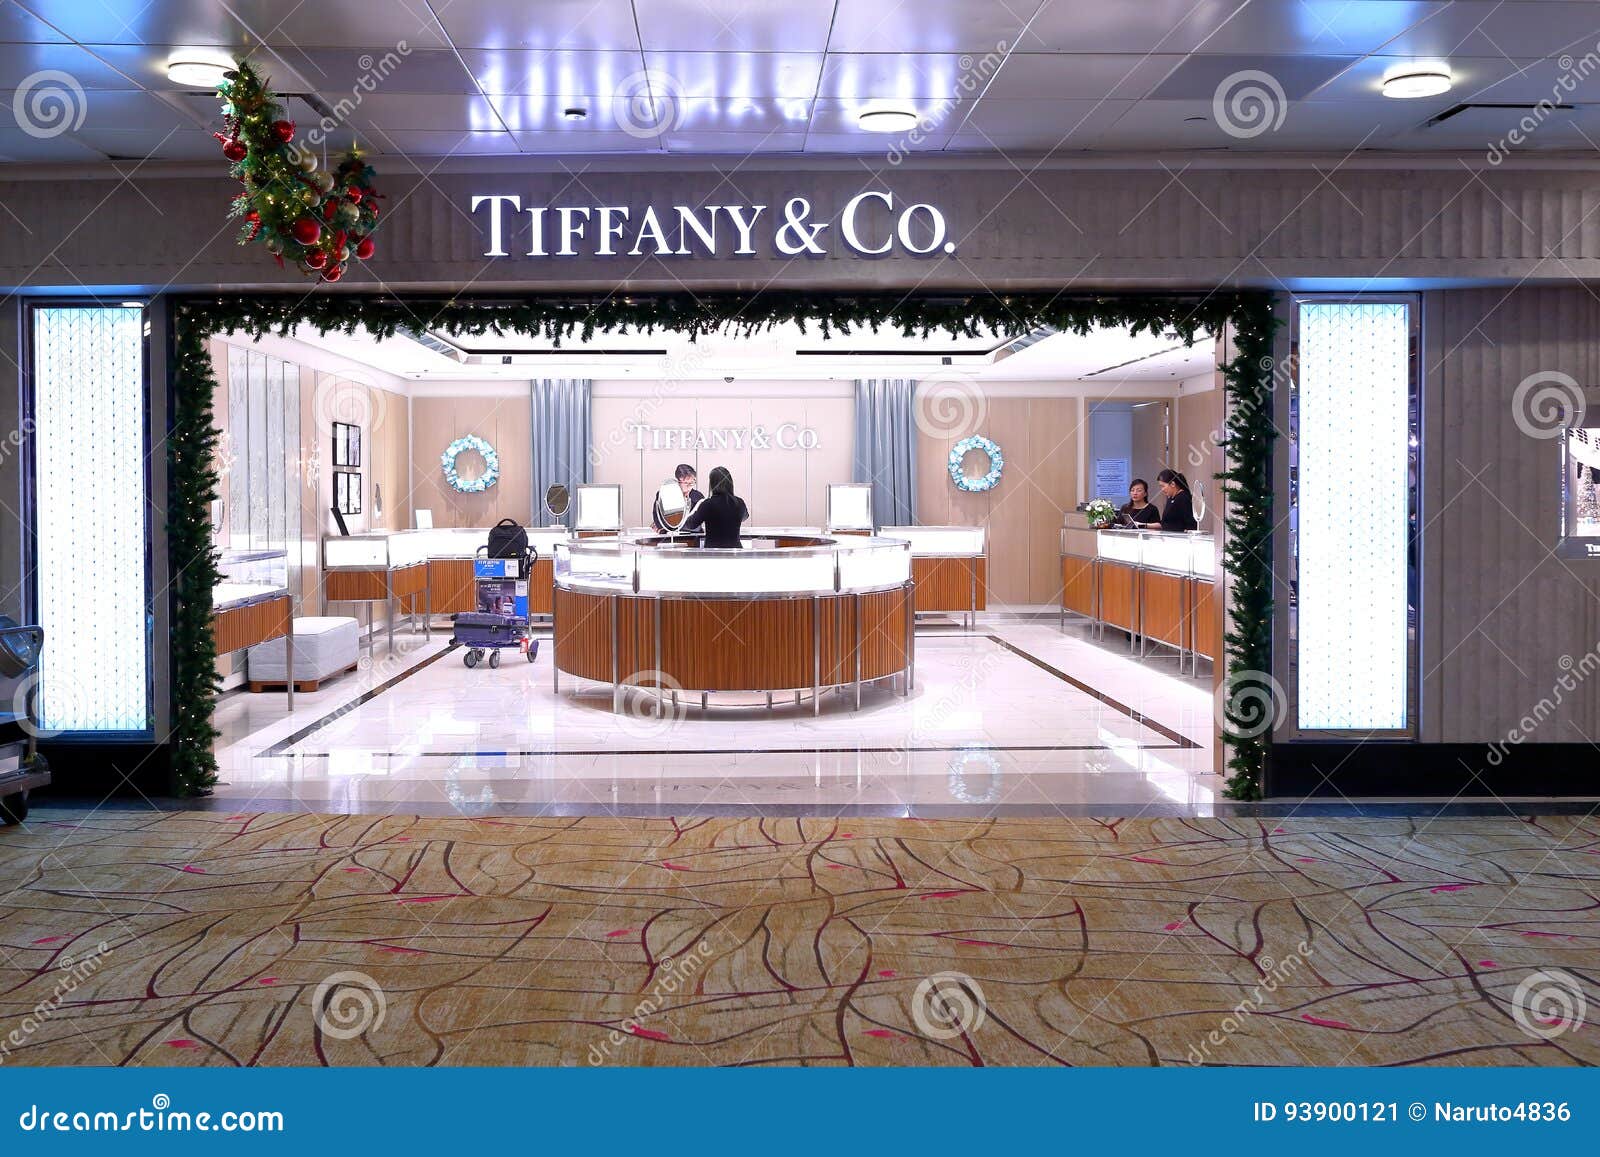 changi airport tiffany and co